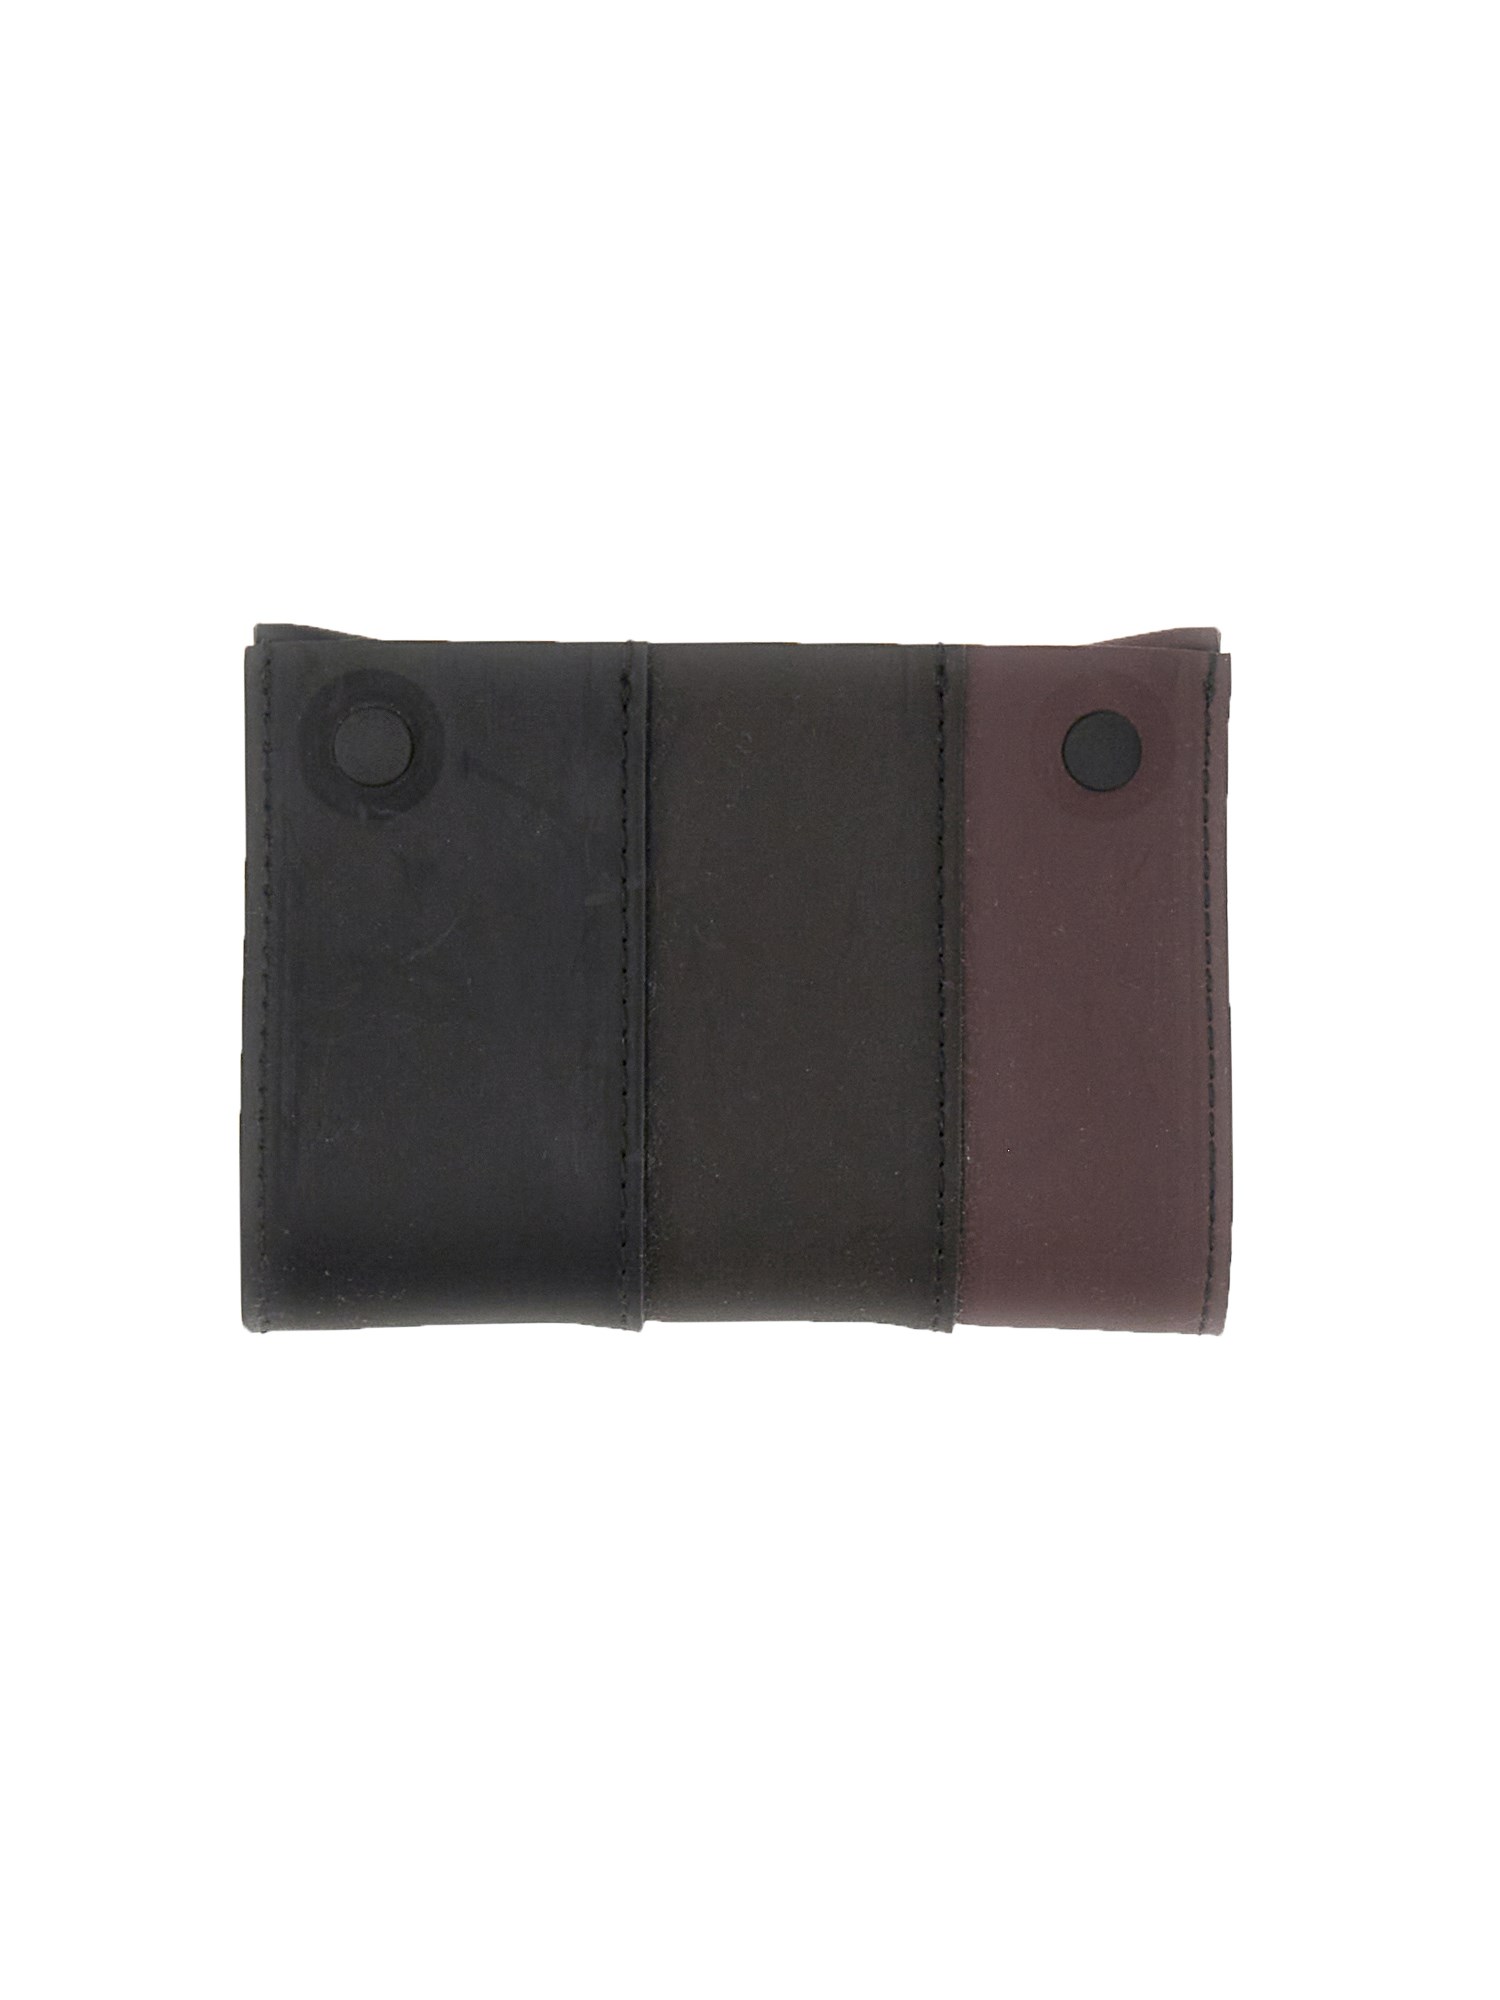 Sunnei sunnei parallelepiped pudding wallet